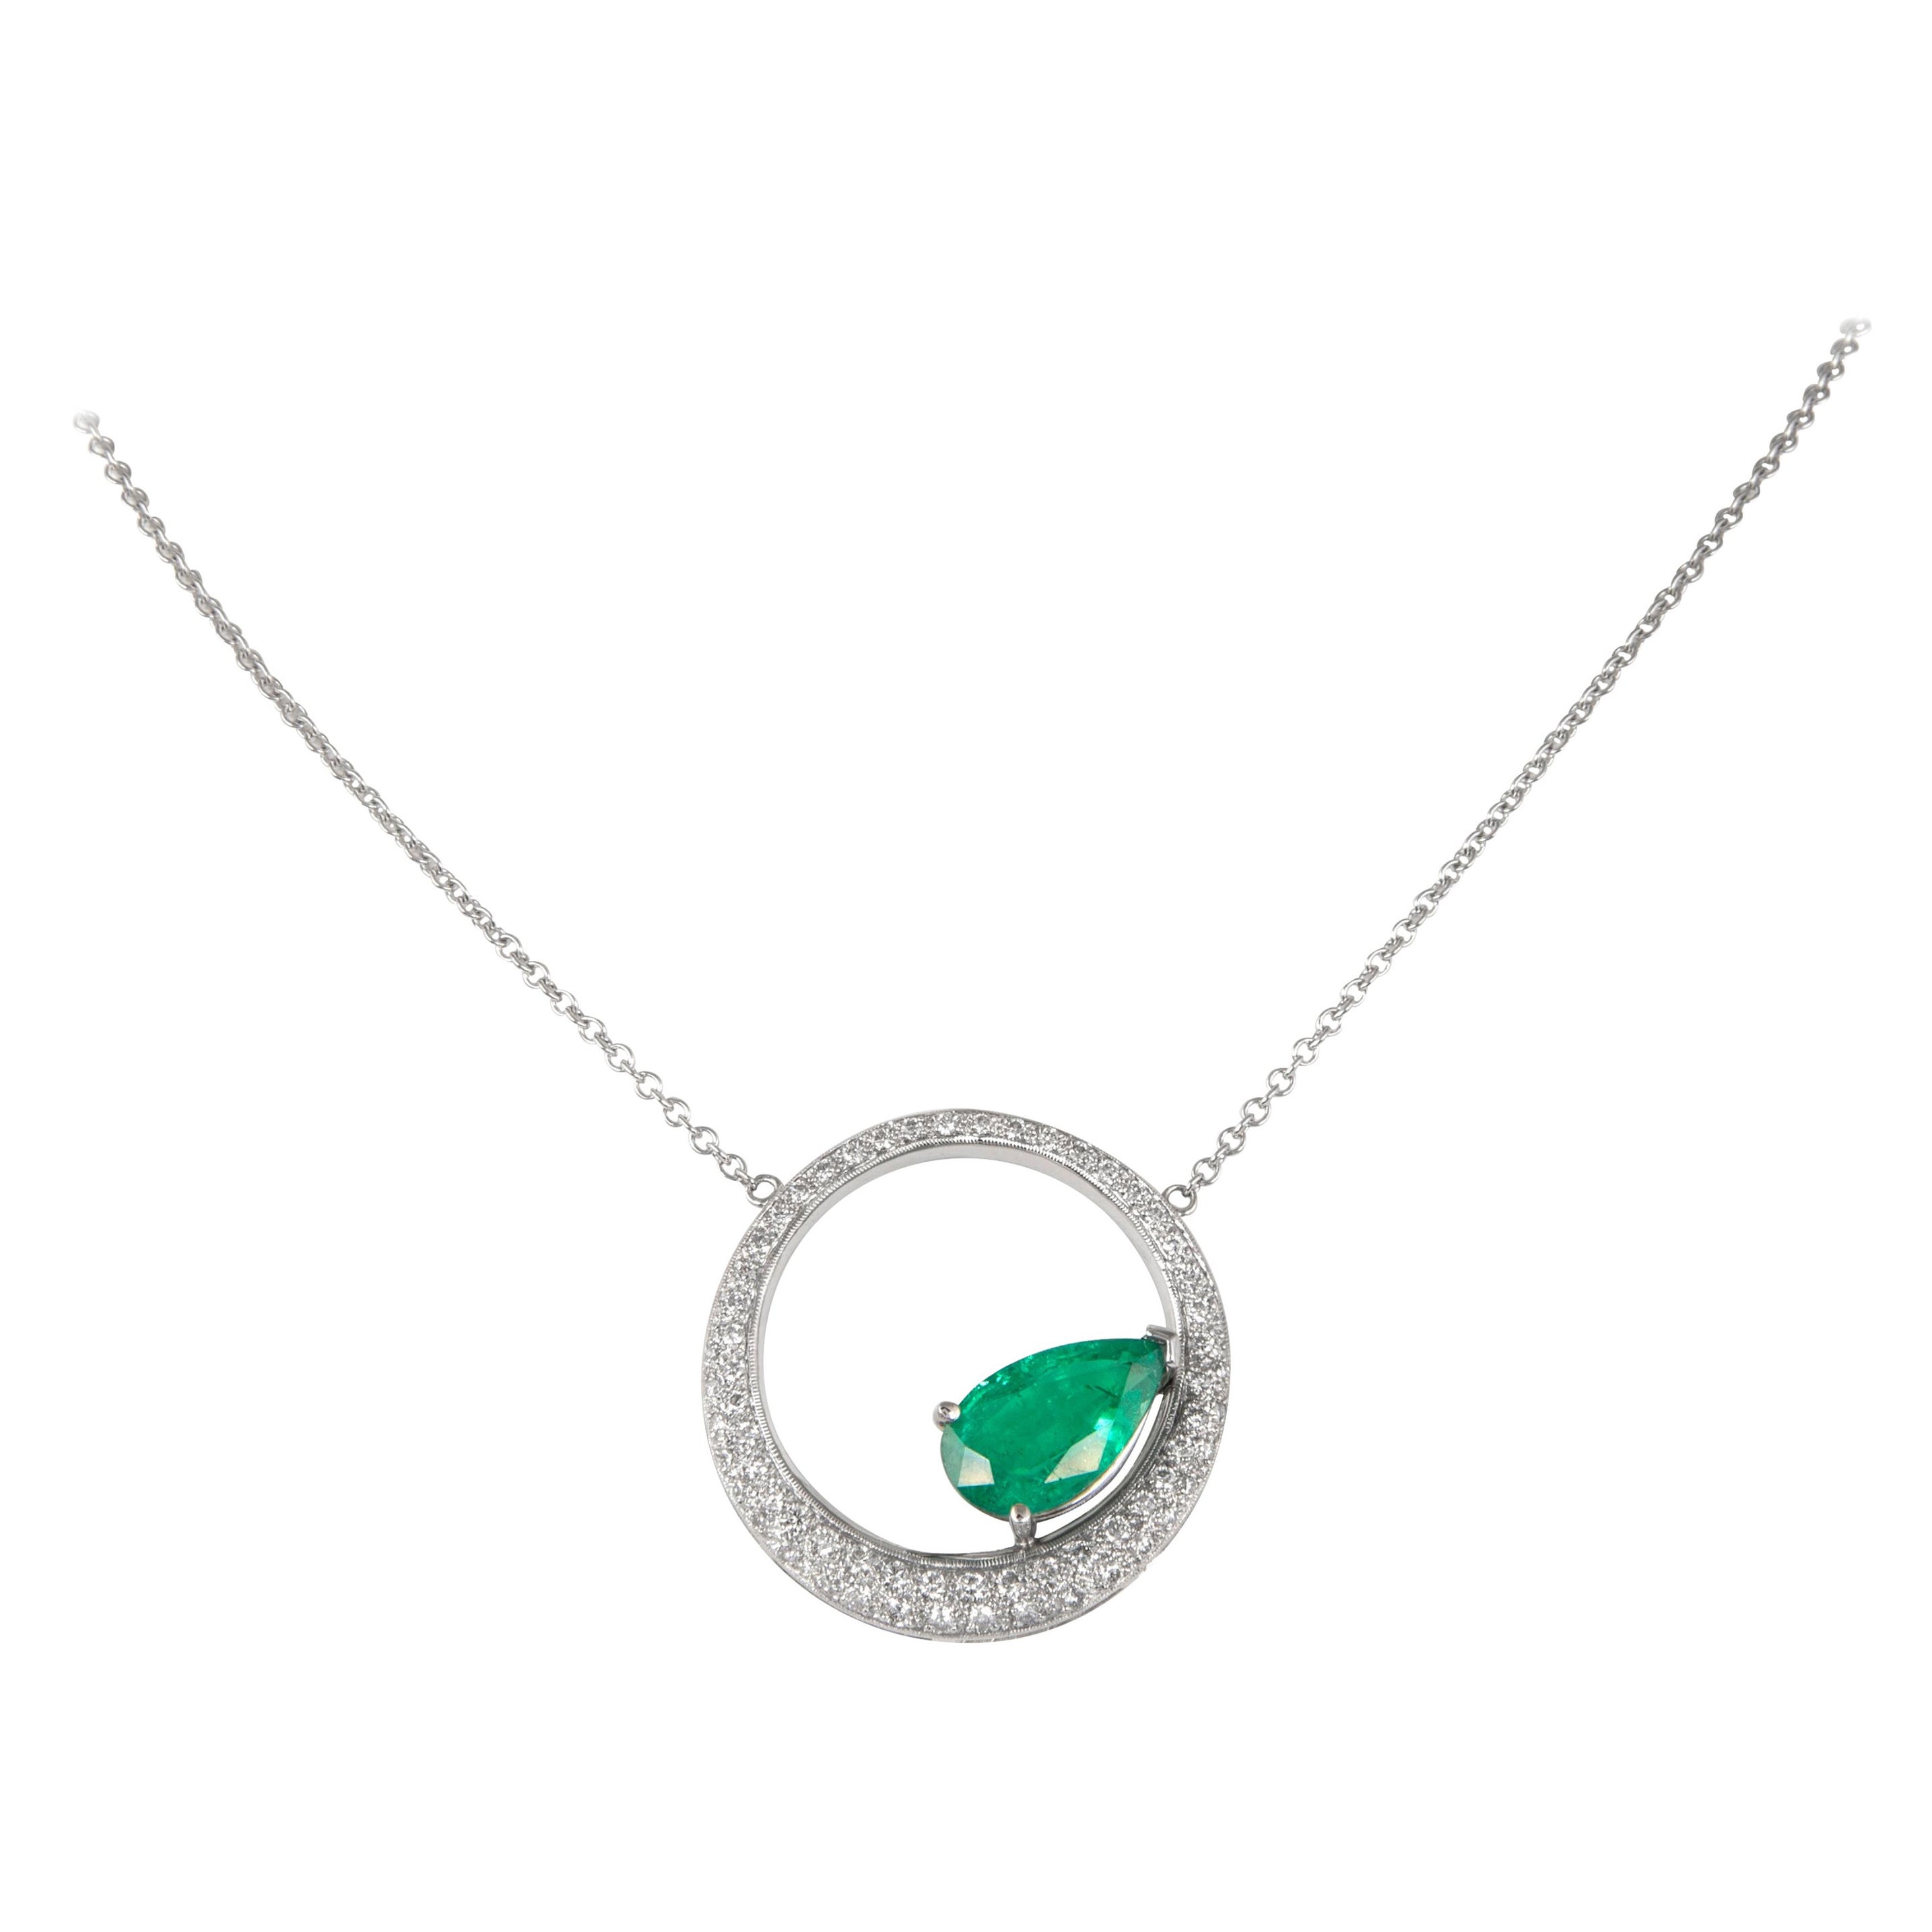 Alexander 2.99ct Emerald with Pave Diamond 18k White Gold Pendant Necklace For Sale